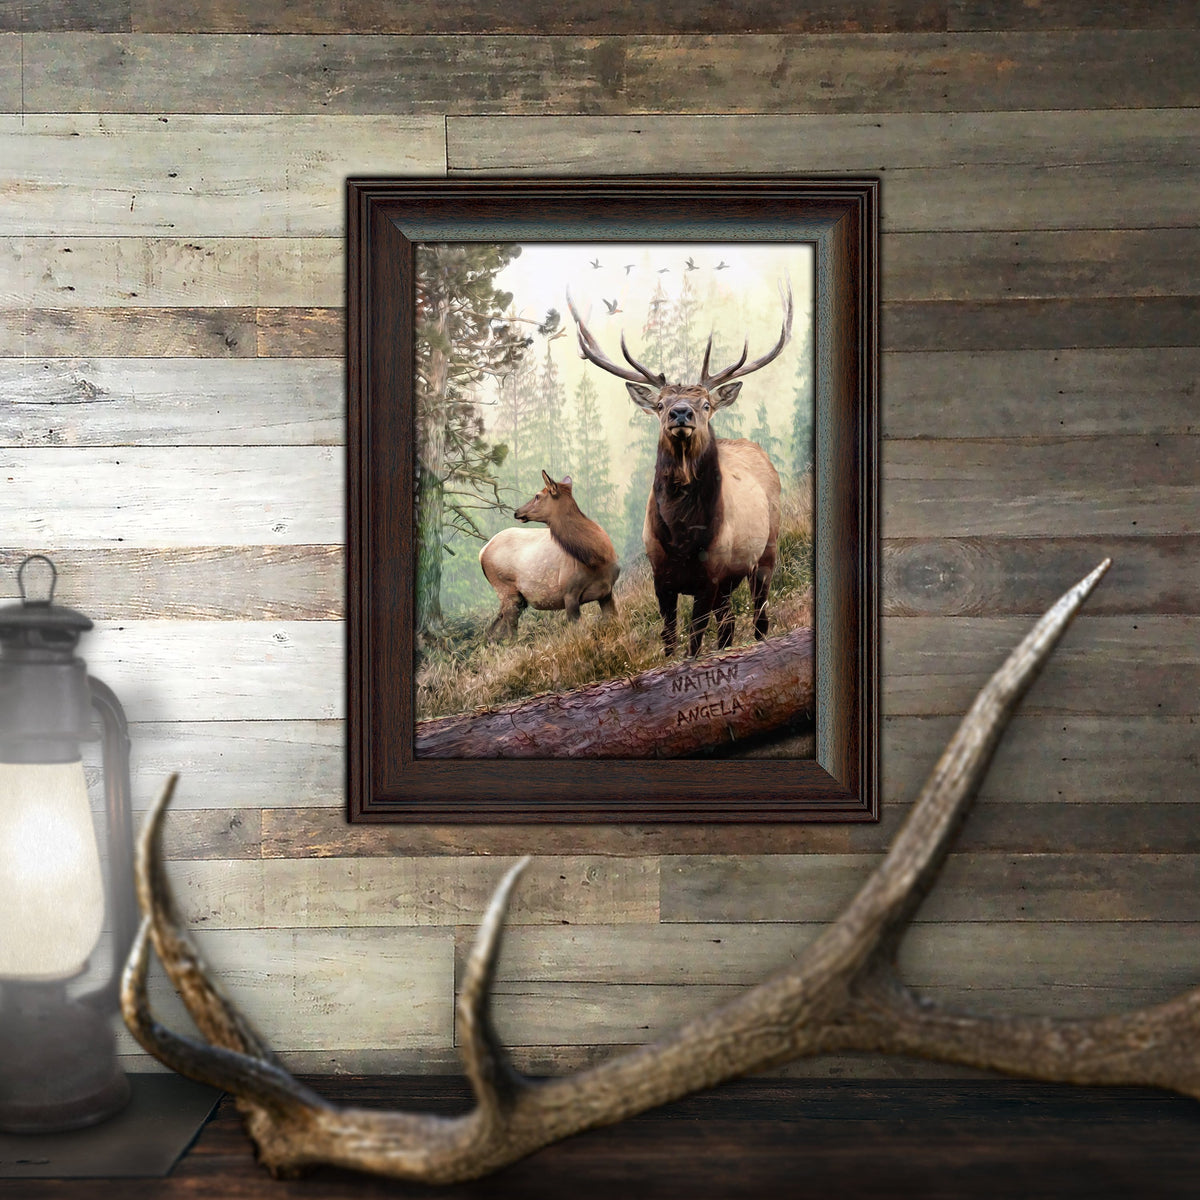 Wildlife personalized gifts from Personal-Prints